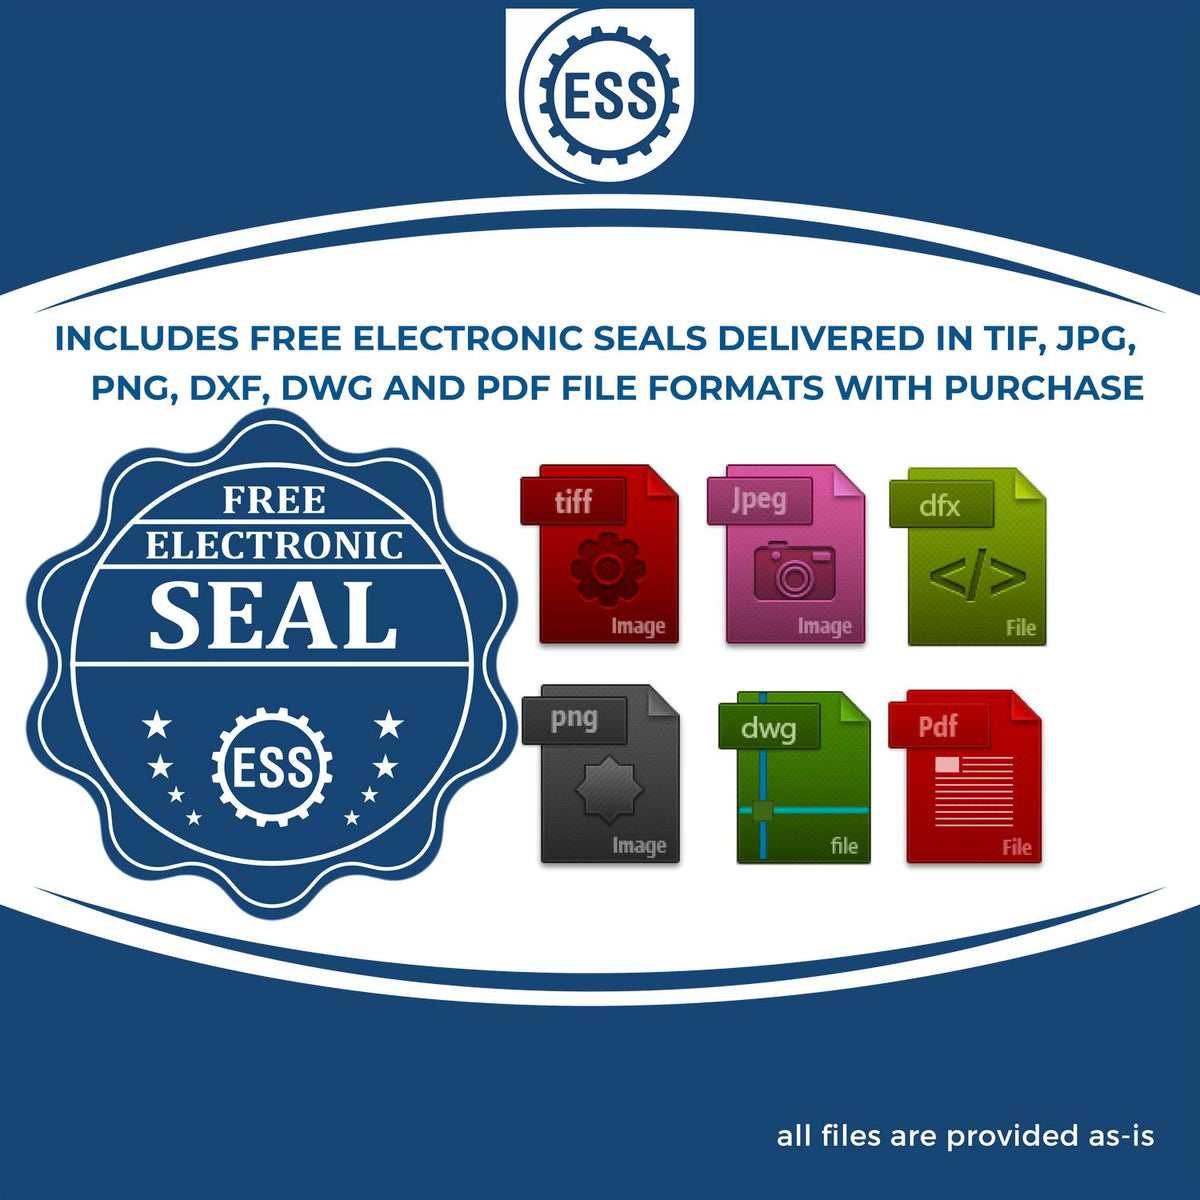 An infographic for the free electronic seal for the Delaware Desk Architect Embossing Seal illustrating the different file type icons such as DXF, DWG, TIF, JPG and PNG.